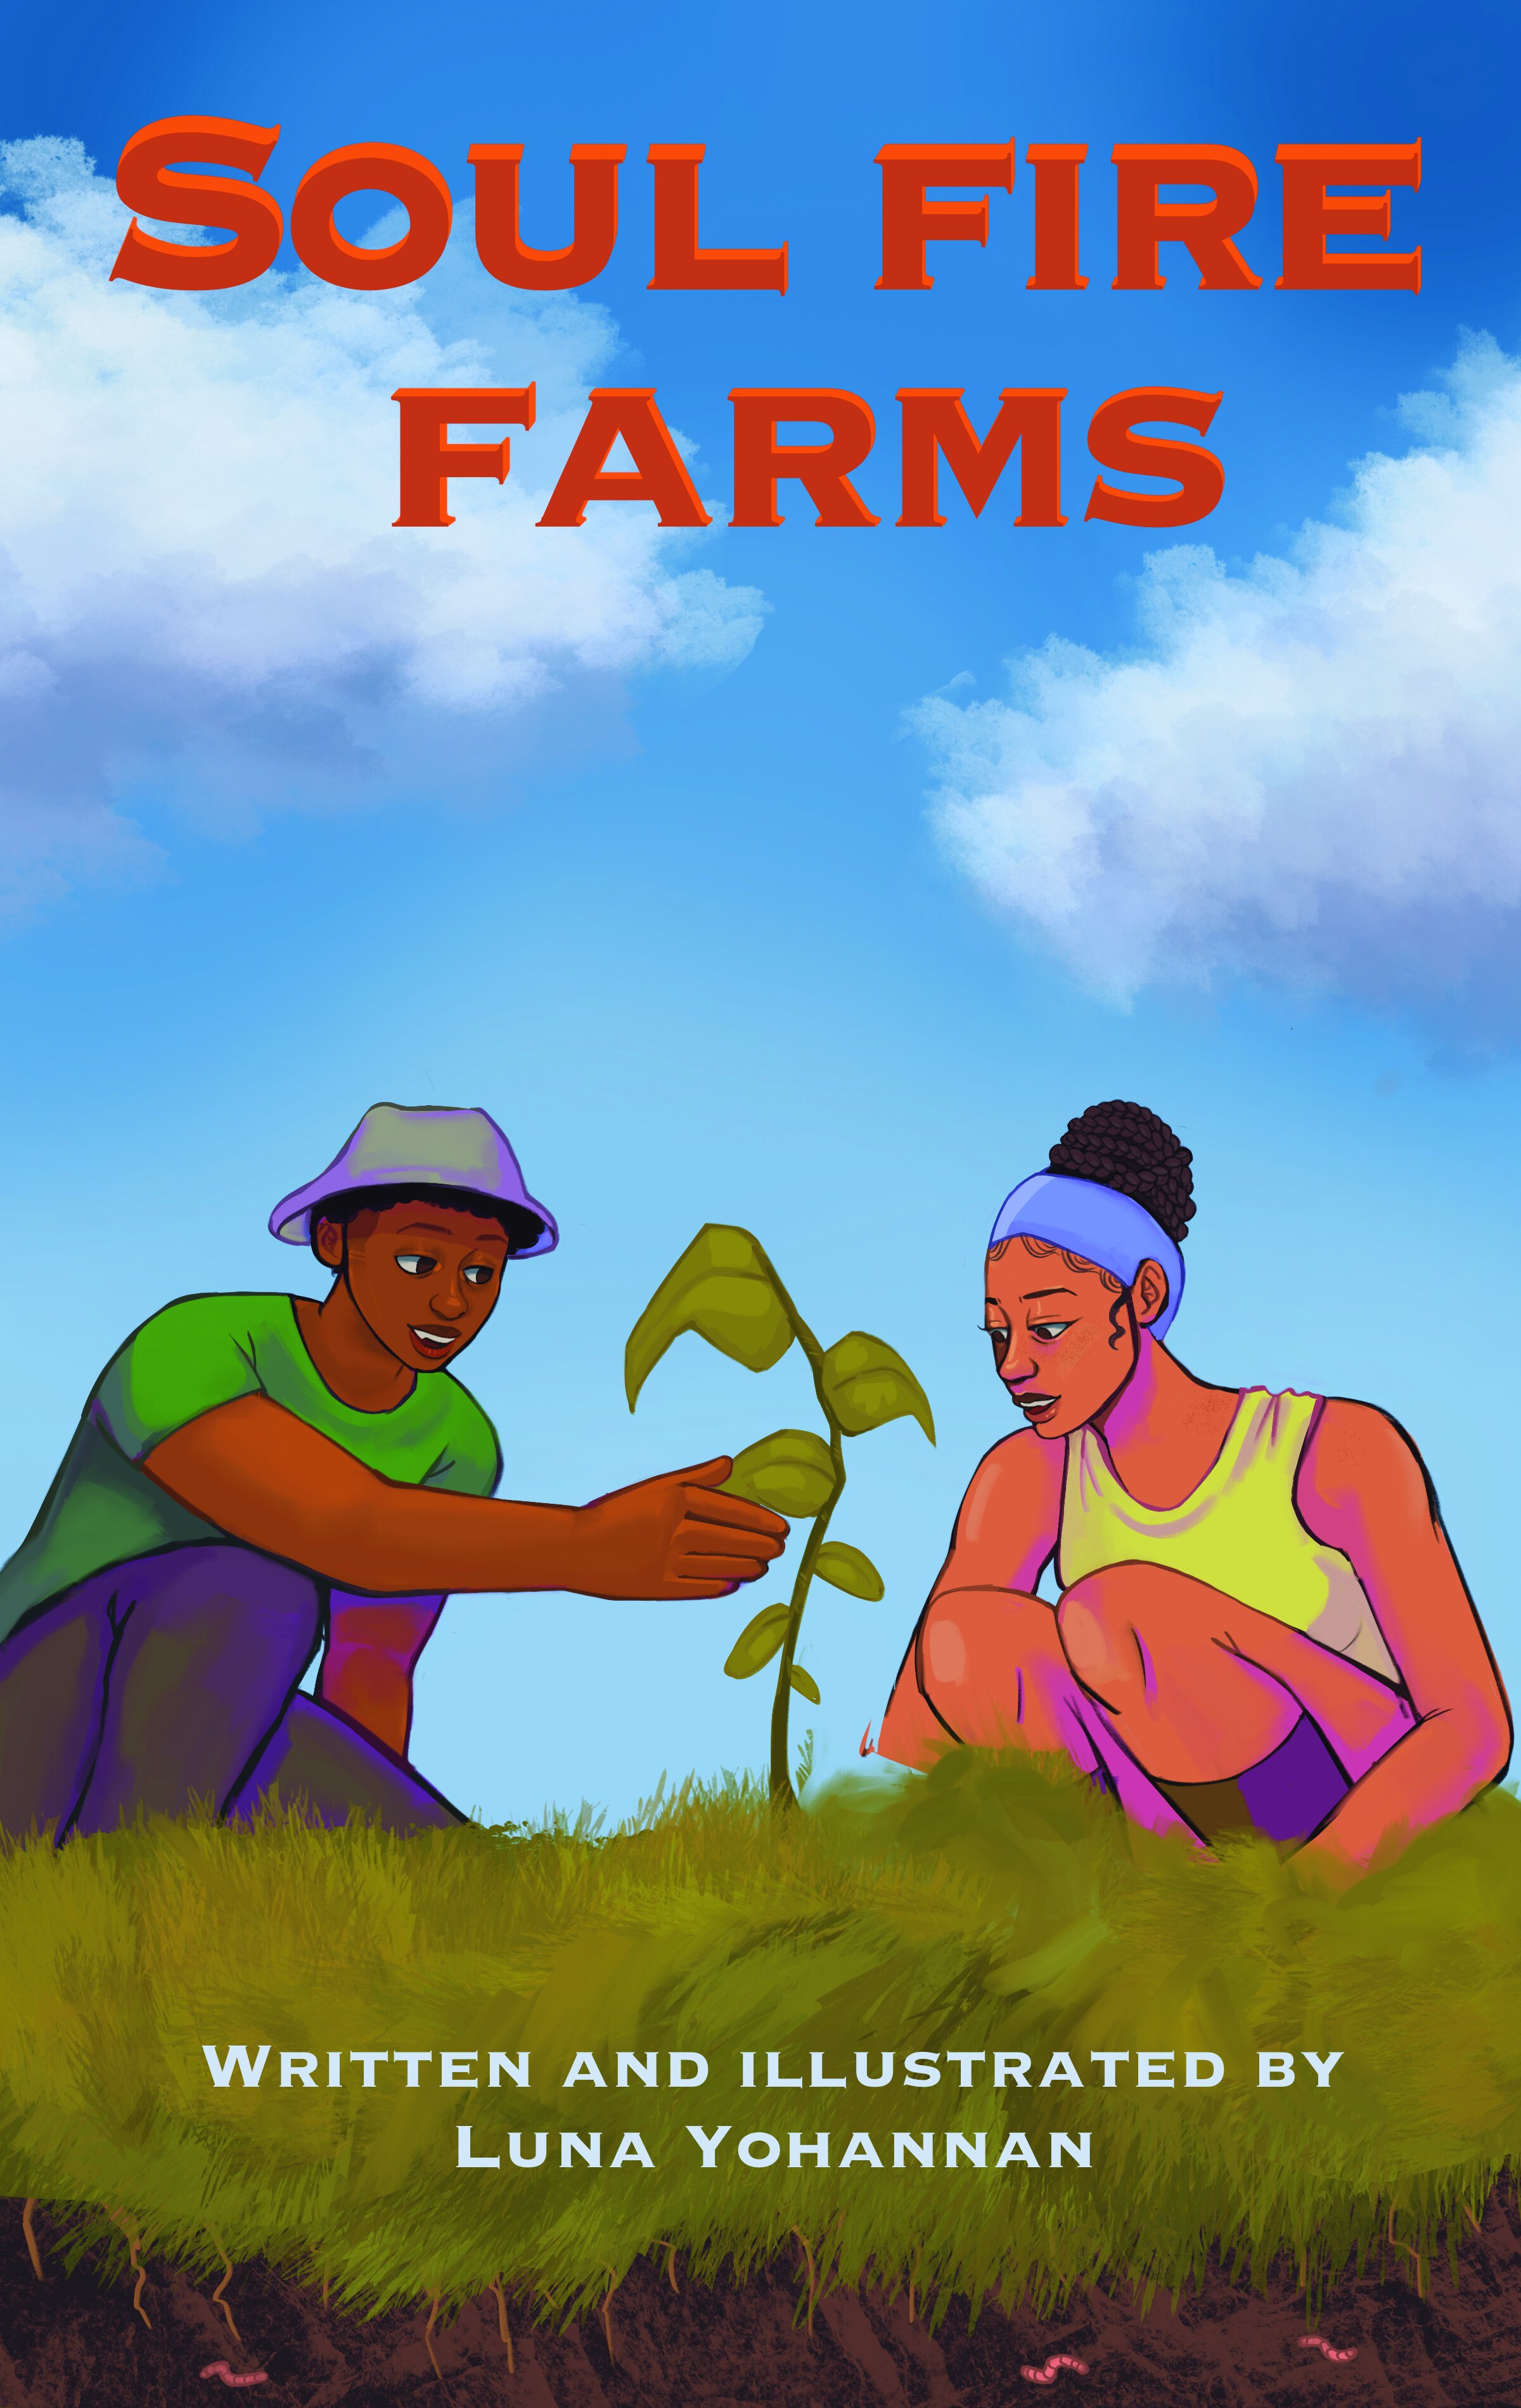   Soul Fire Farms (2021).  Cover art for a TPC member’s graphic short story.  